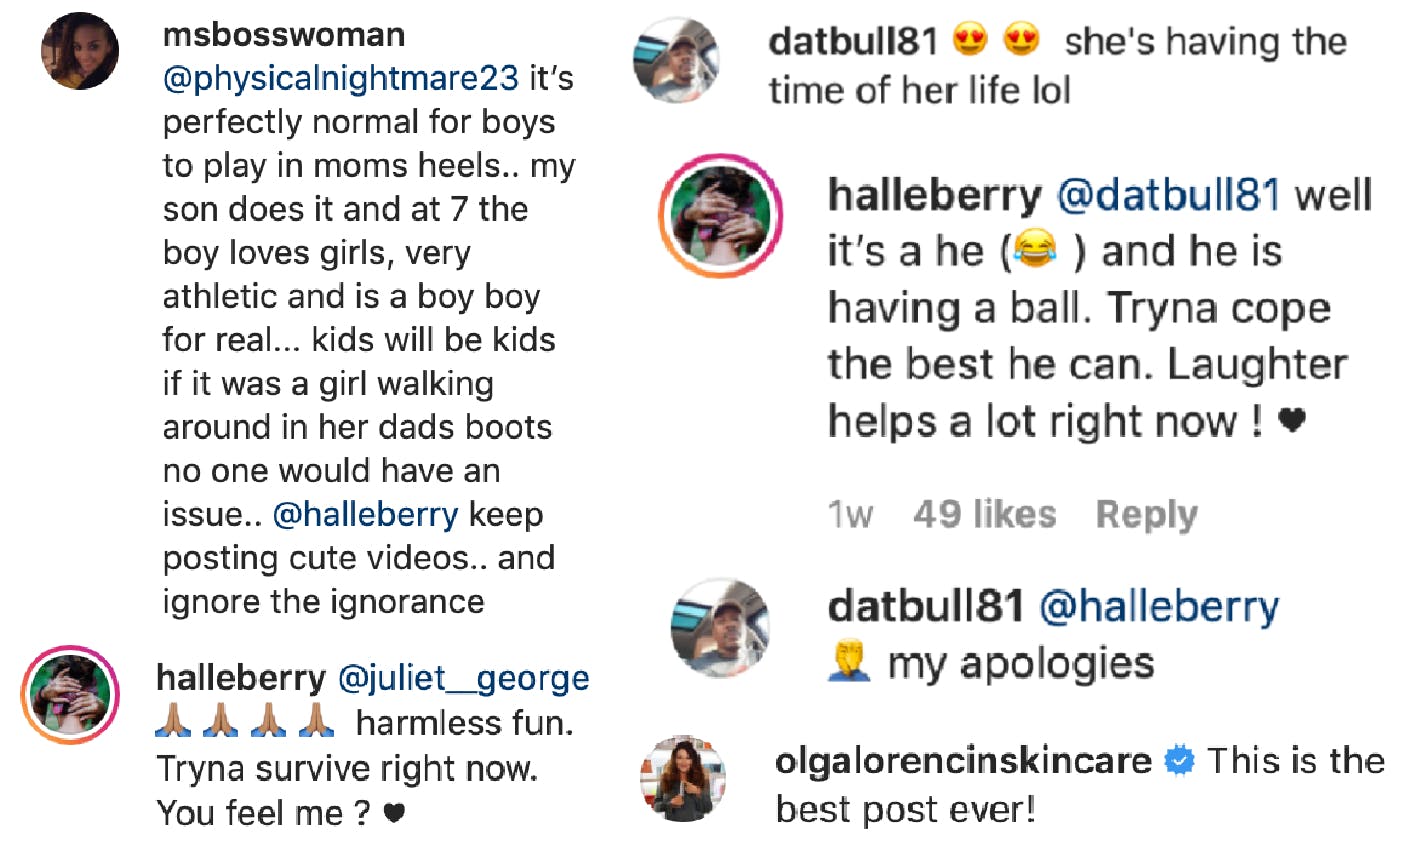 Halle Berry - Instagram comments